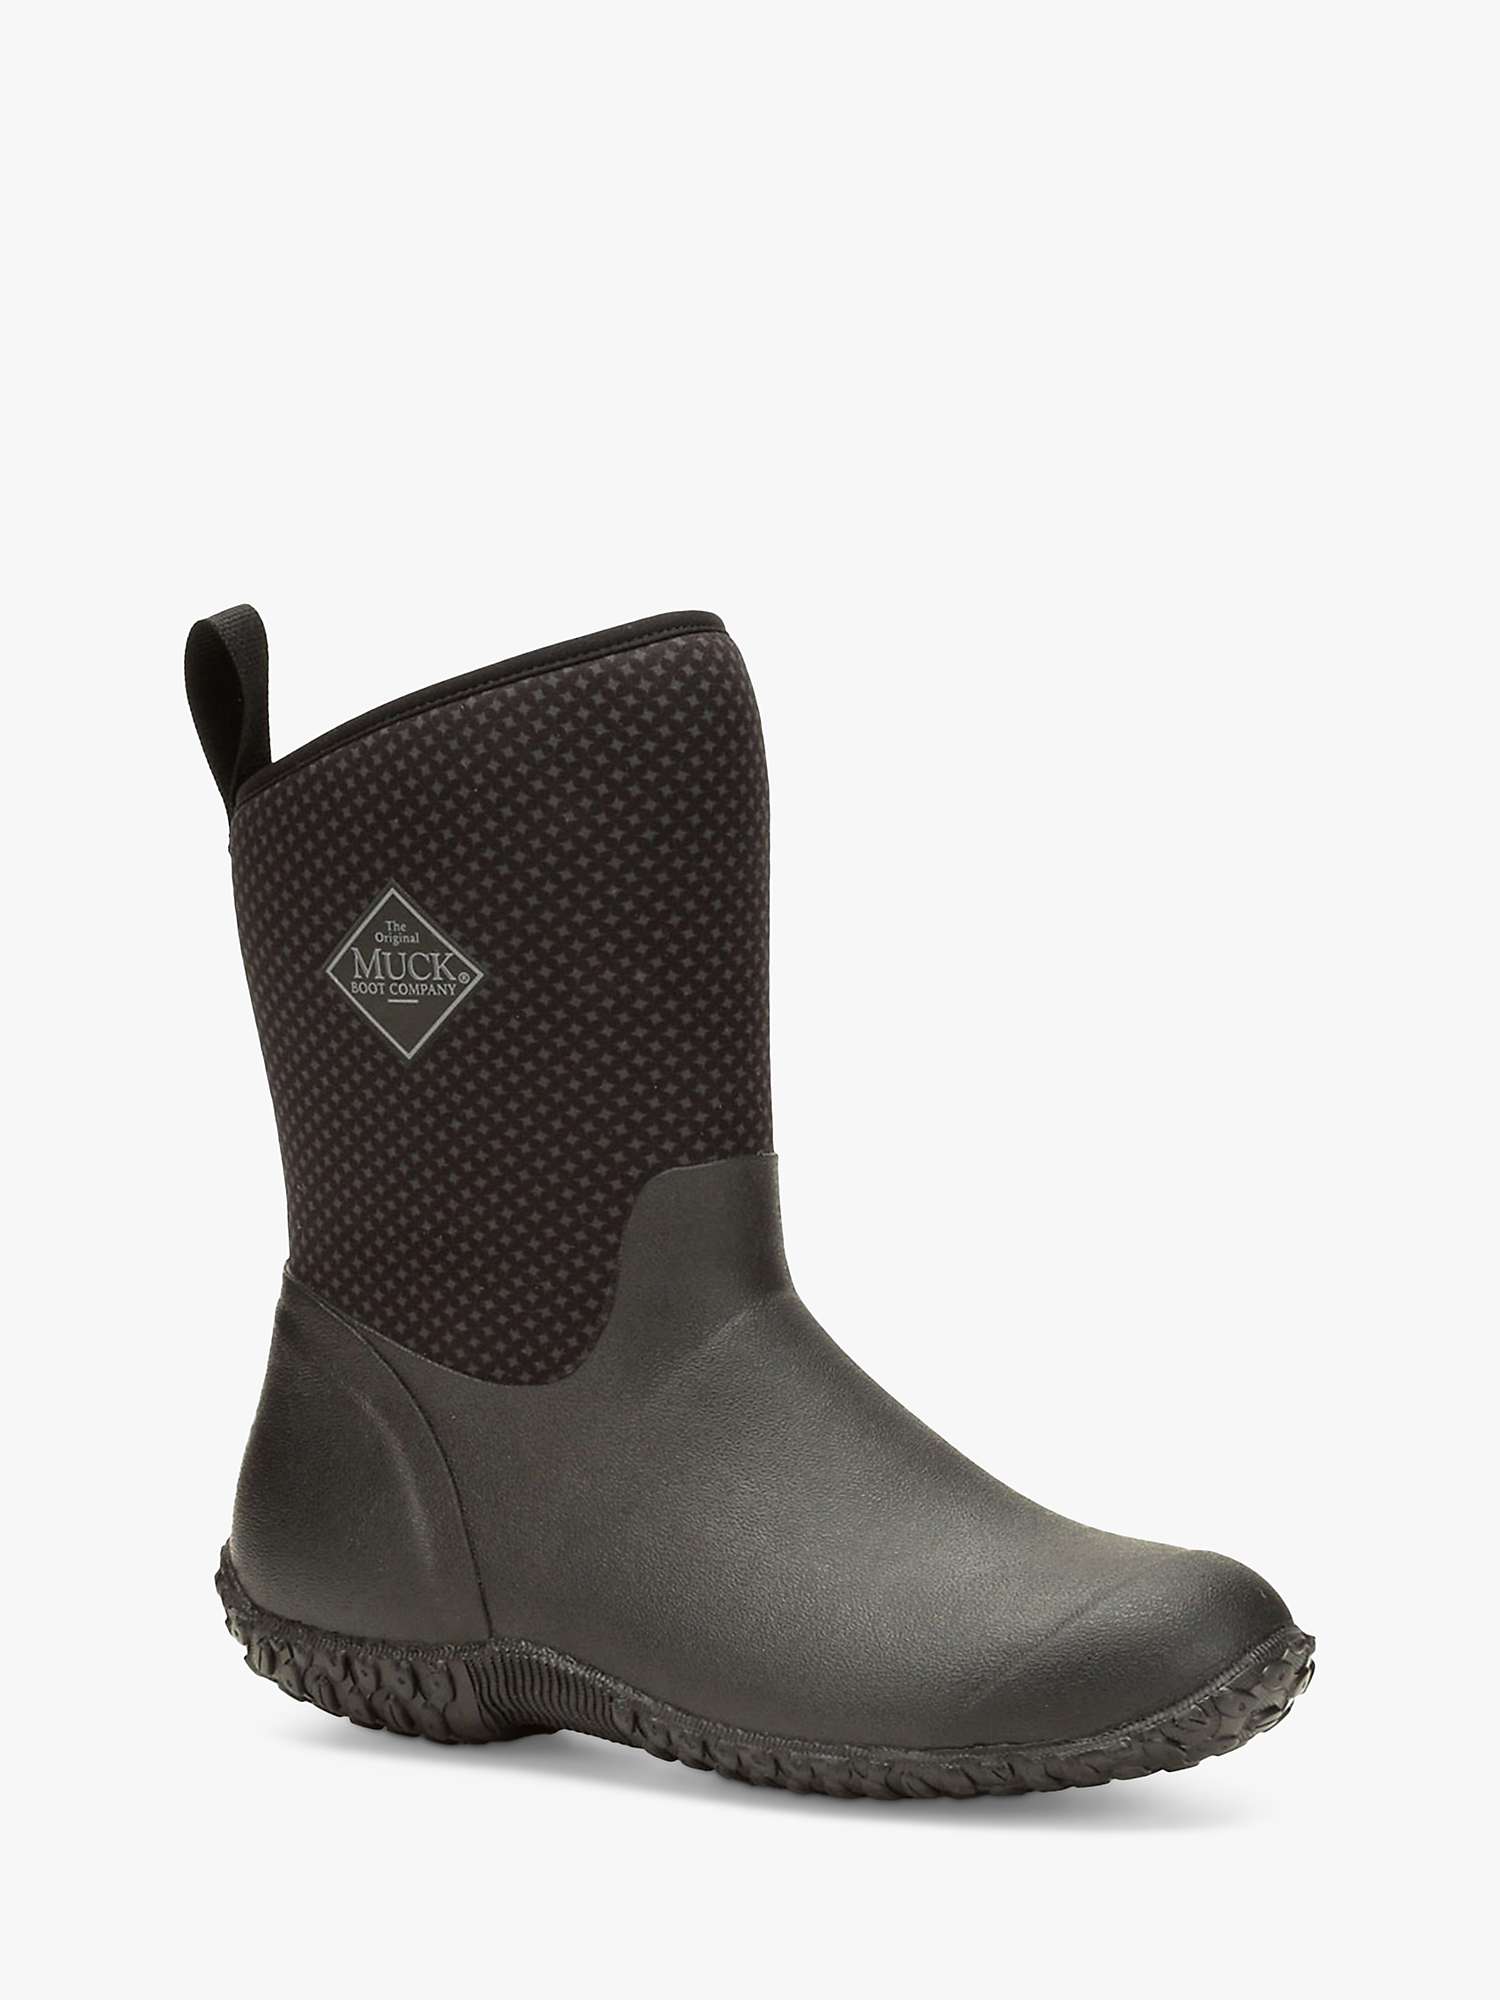 Buy Muck RHS Muckster II Mid Wellington Boots, Charcoal Online at johnlewis.com